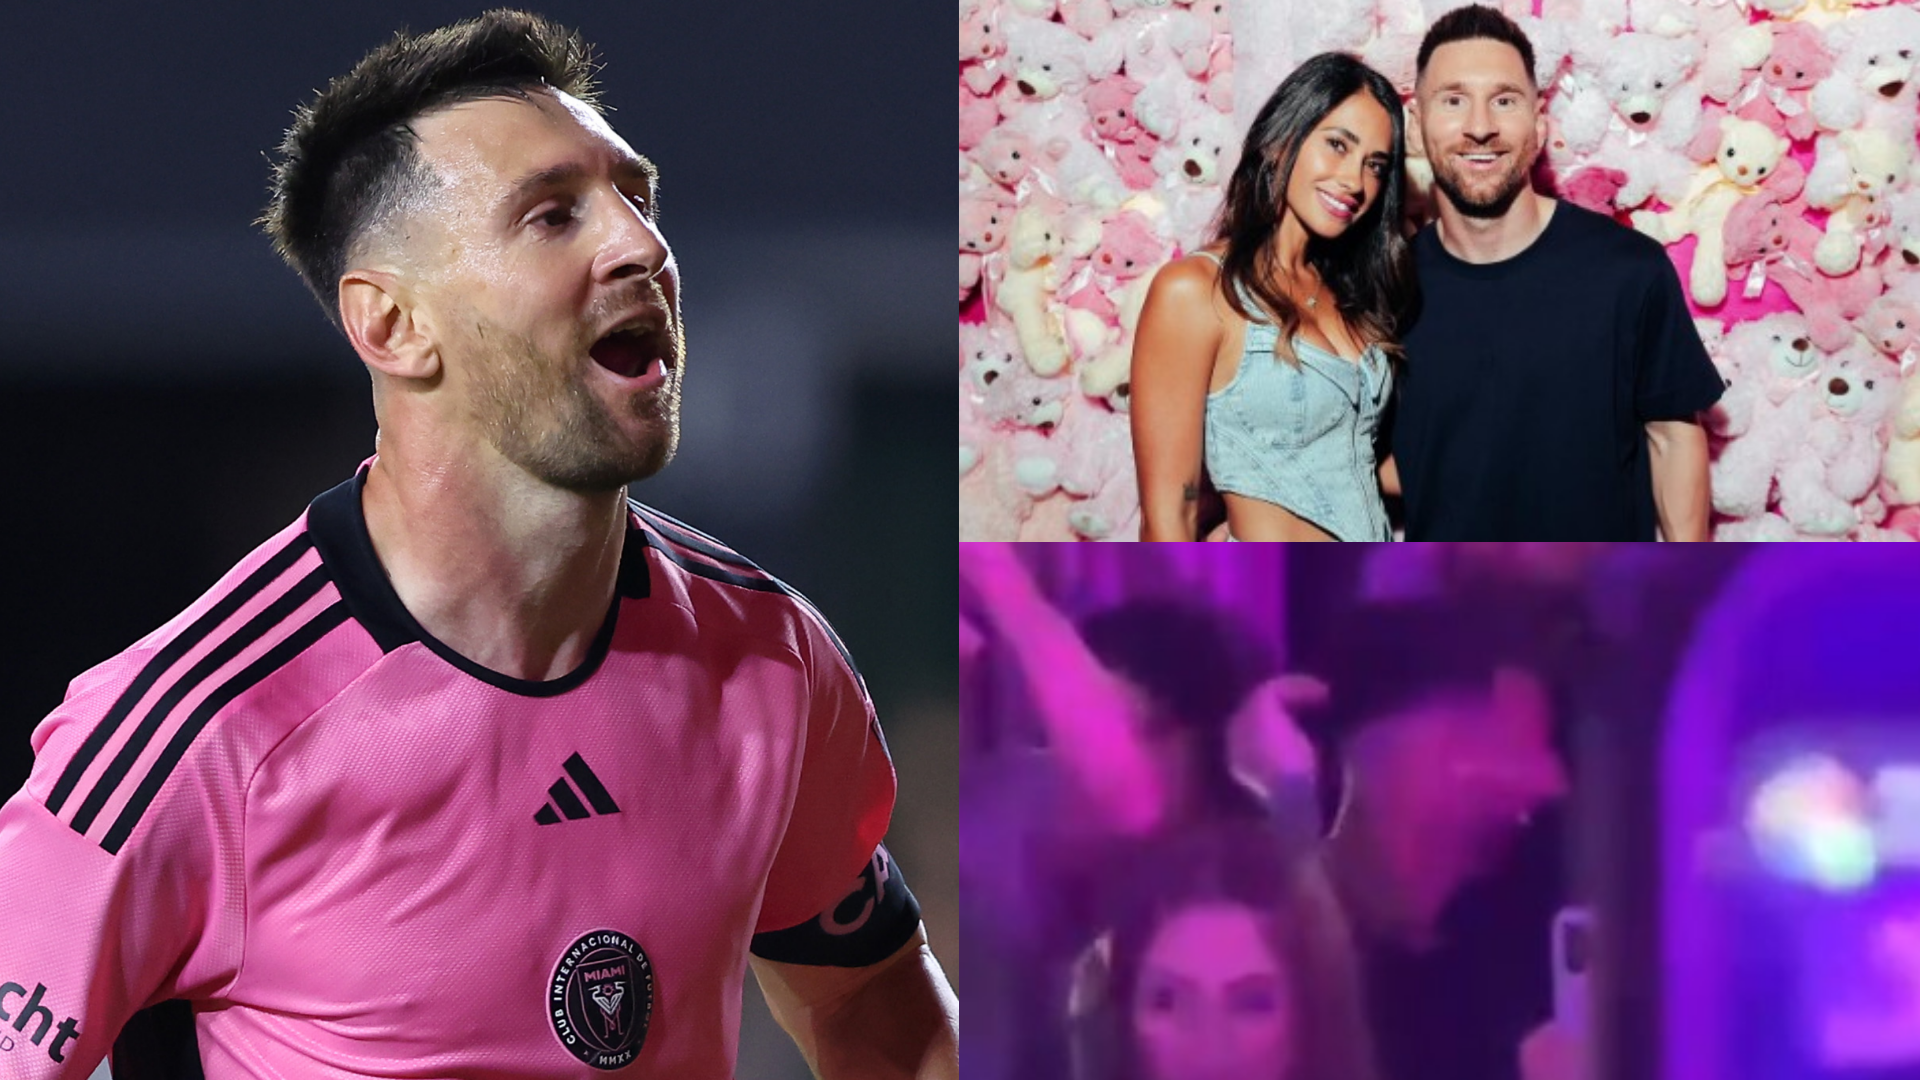 VIDEO: Lionel Messi lets loose! Inter Miami star dances along to Maria Becerra performance as he heads back to Bresh nightclub with wife Antonela Roccuzzo after latest MLS outing | Goal.com